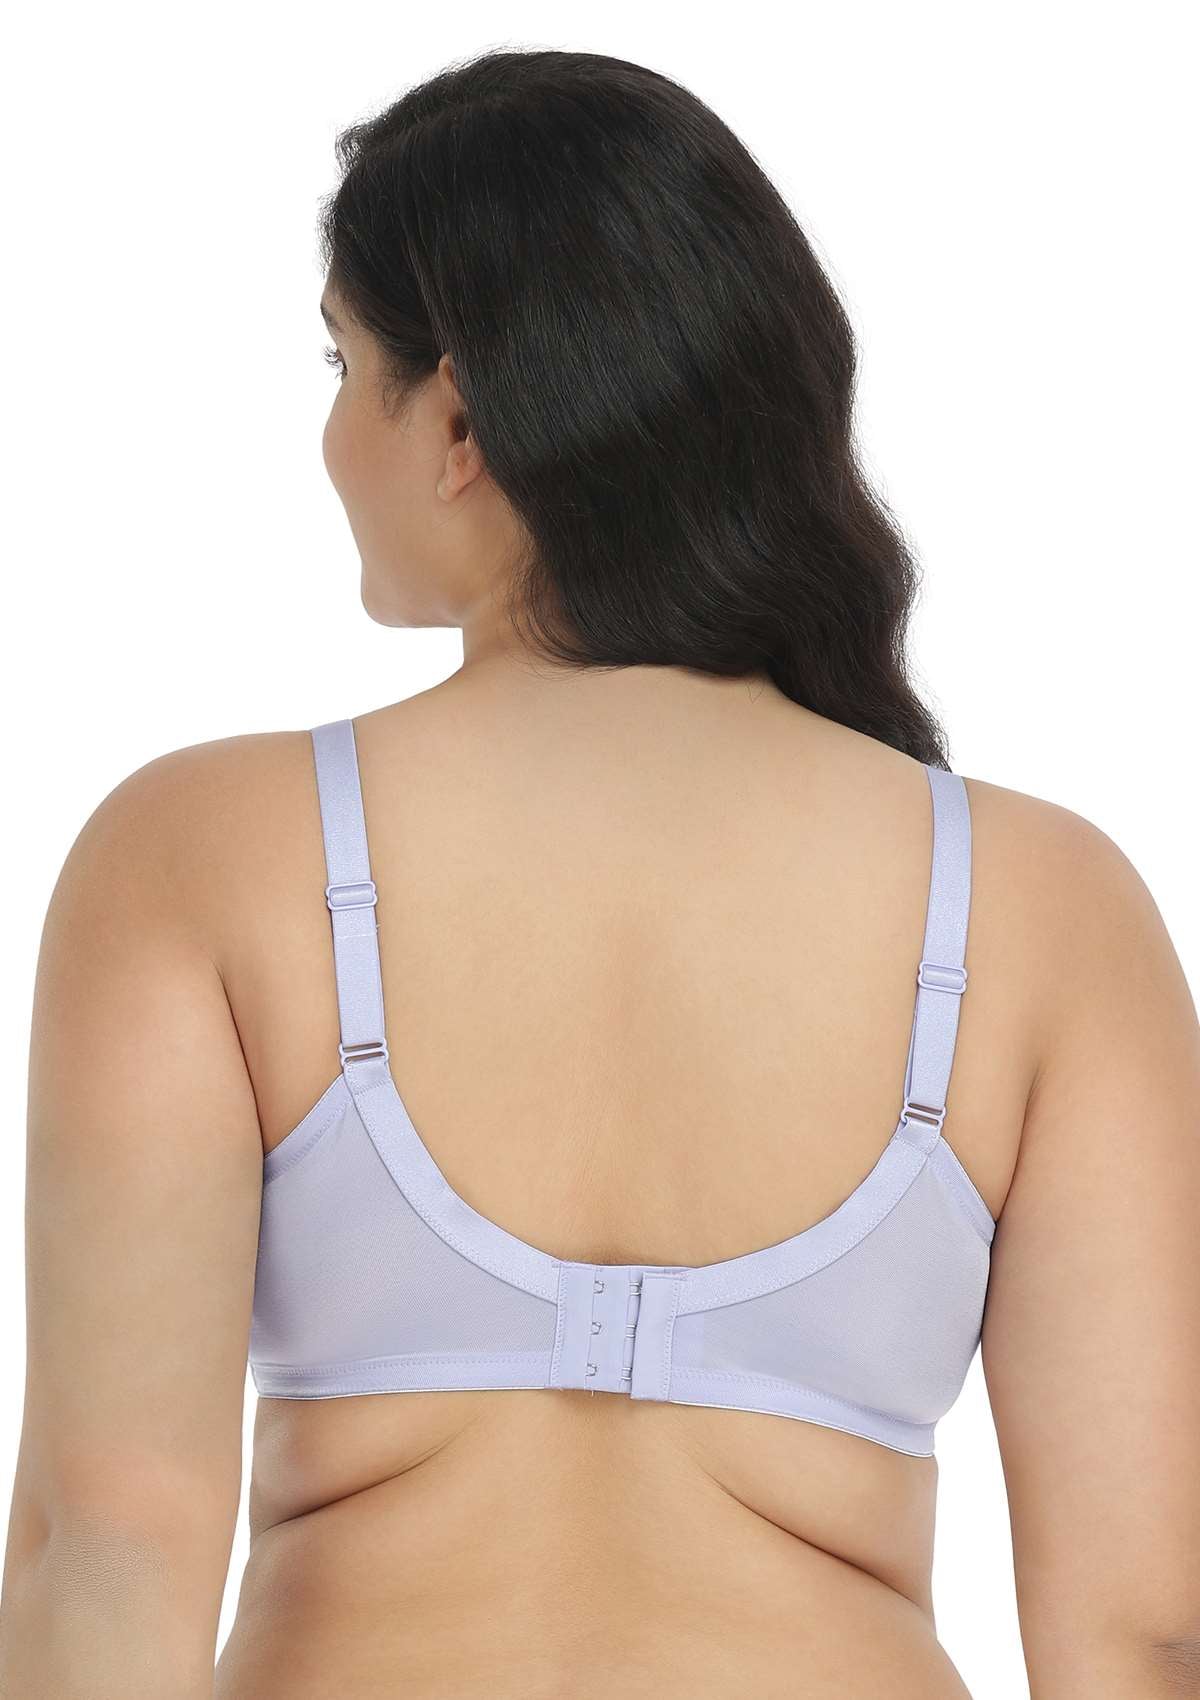 HSIA Wisteria Bra For Lift And Support - Full Coverage Minimizer Bra - Light Pink / 36 / DDD/F